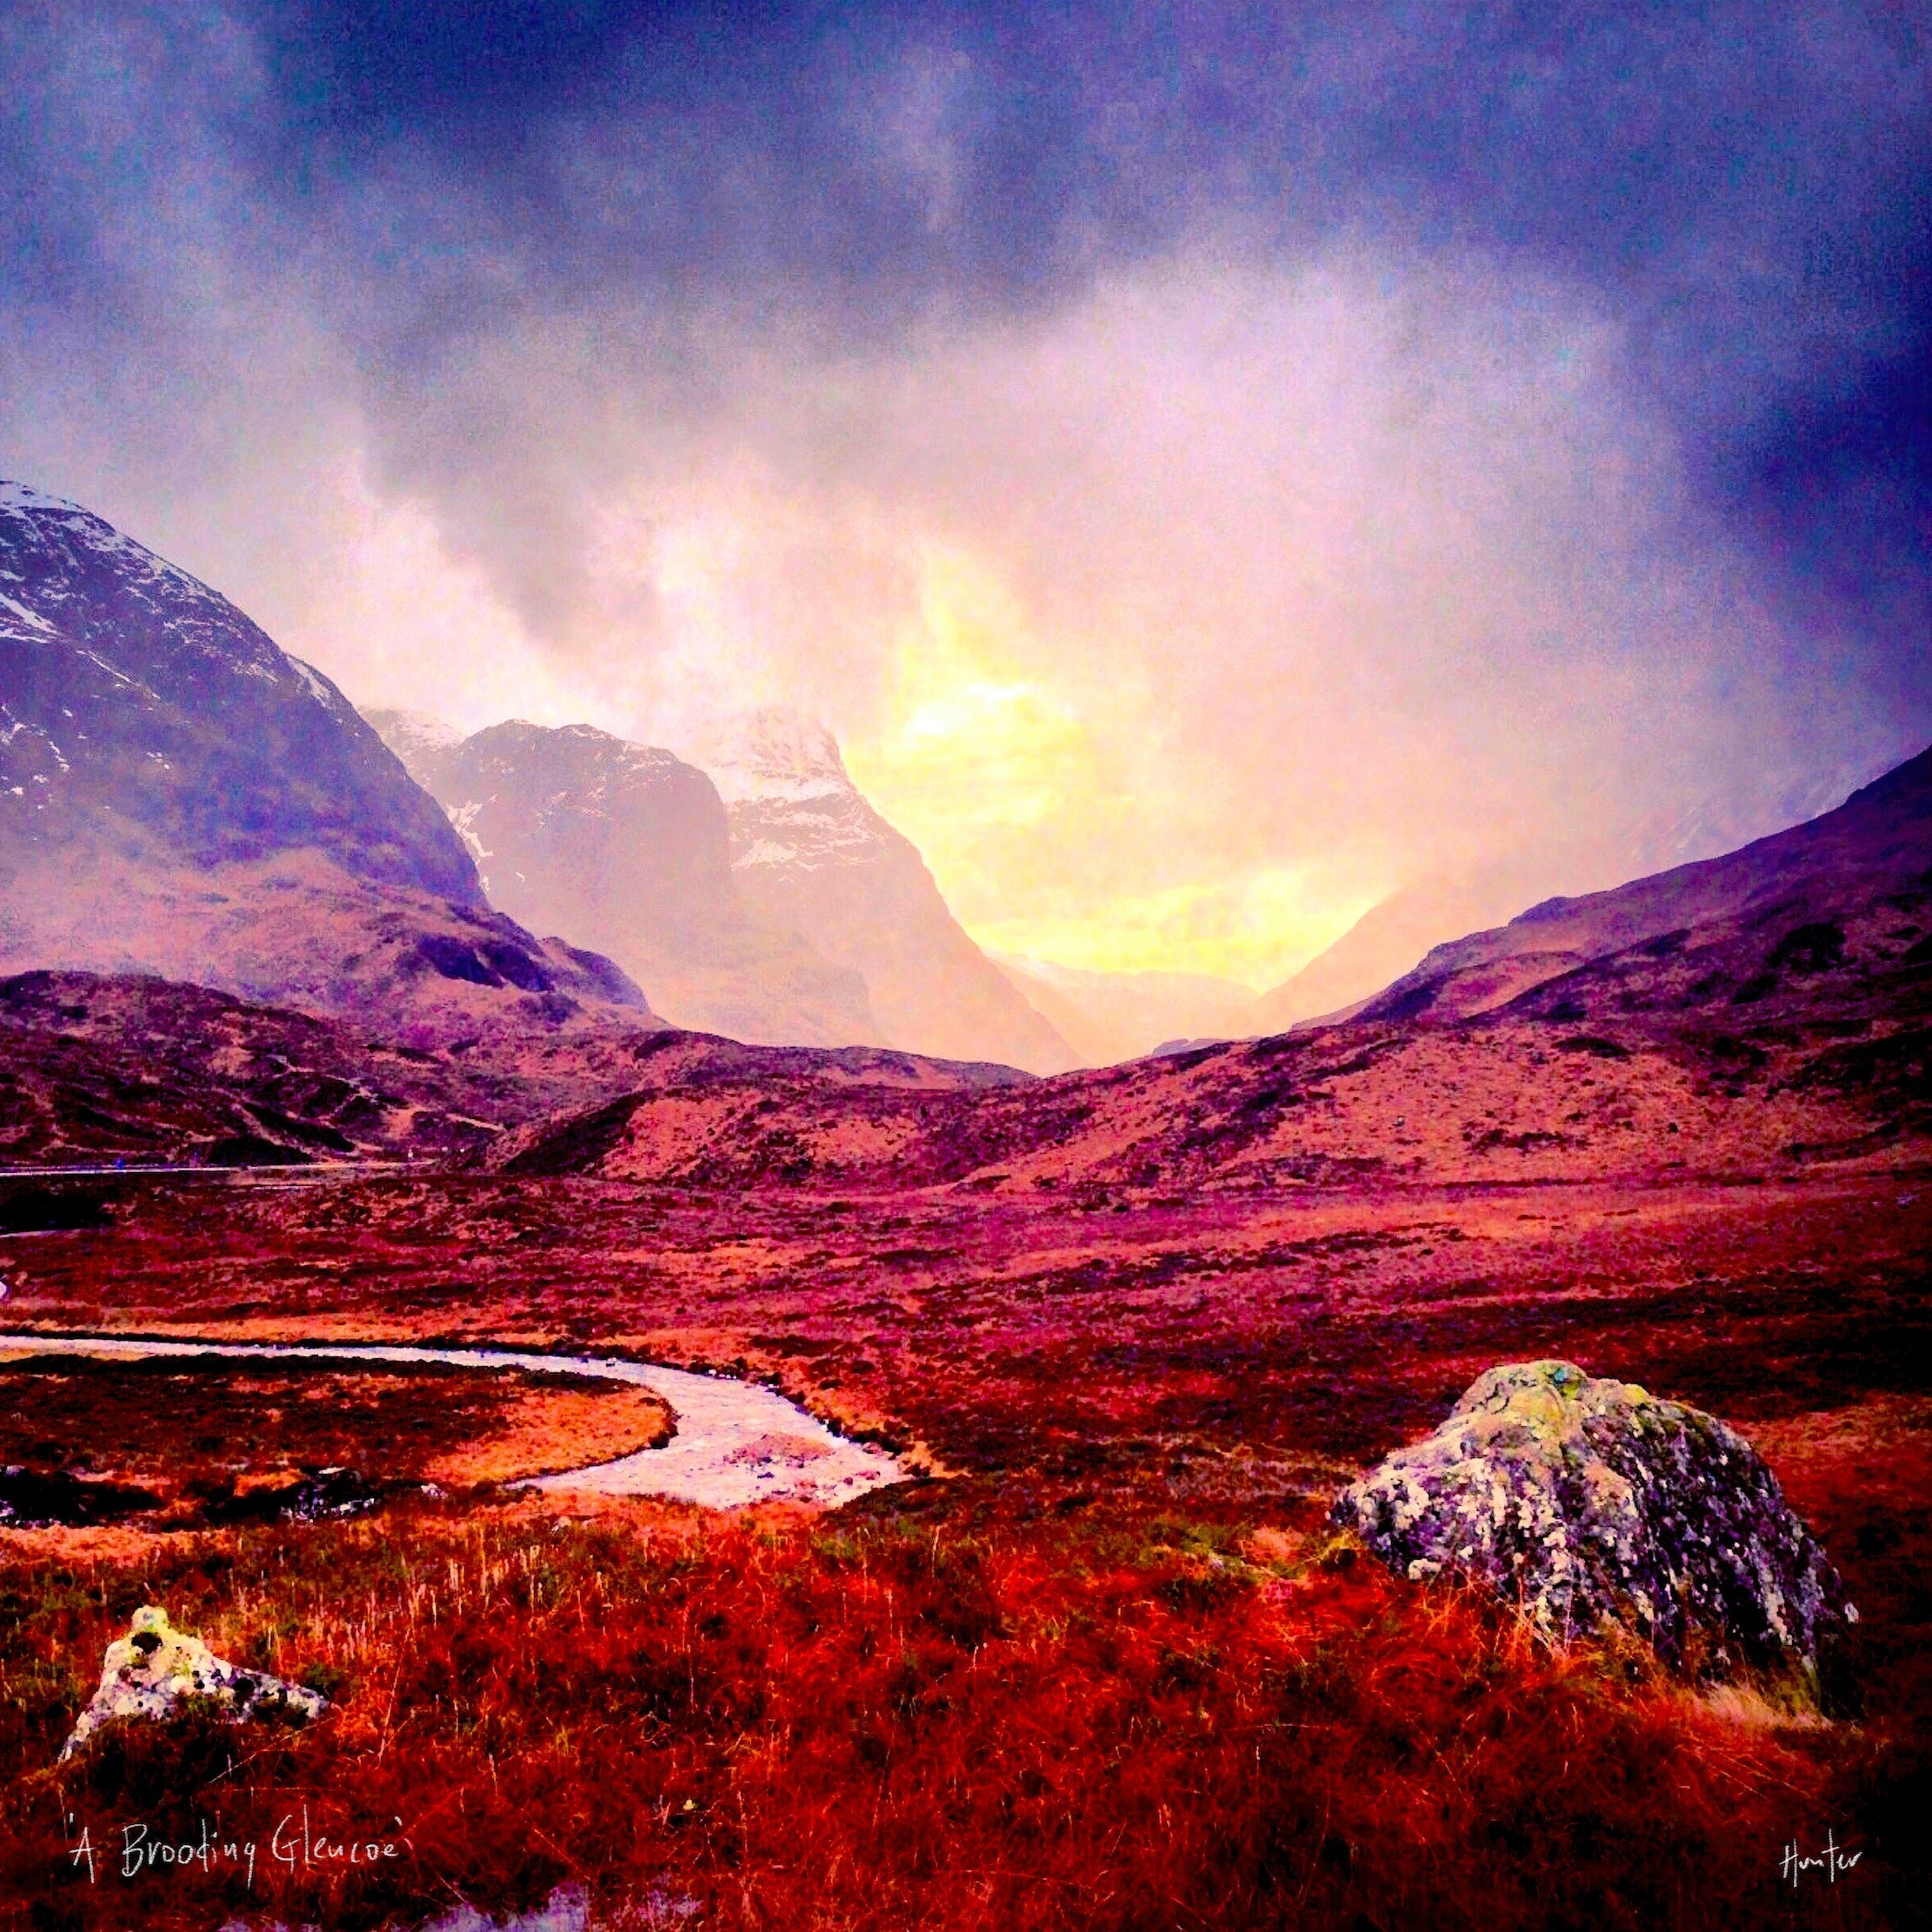 A Brooding Glencoe | Scotland In Your Pocket Art Print-Scotland In Your Pocket Framed Prints-Glencoe Art Gallery-Mounted & Cello Bag: 12.5x12.5 cm-Black Frame-Paintings, Prints, Homeware, Art Gifts From Scotland By Scottish Artist Kevin Hunter